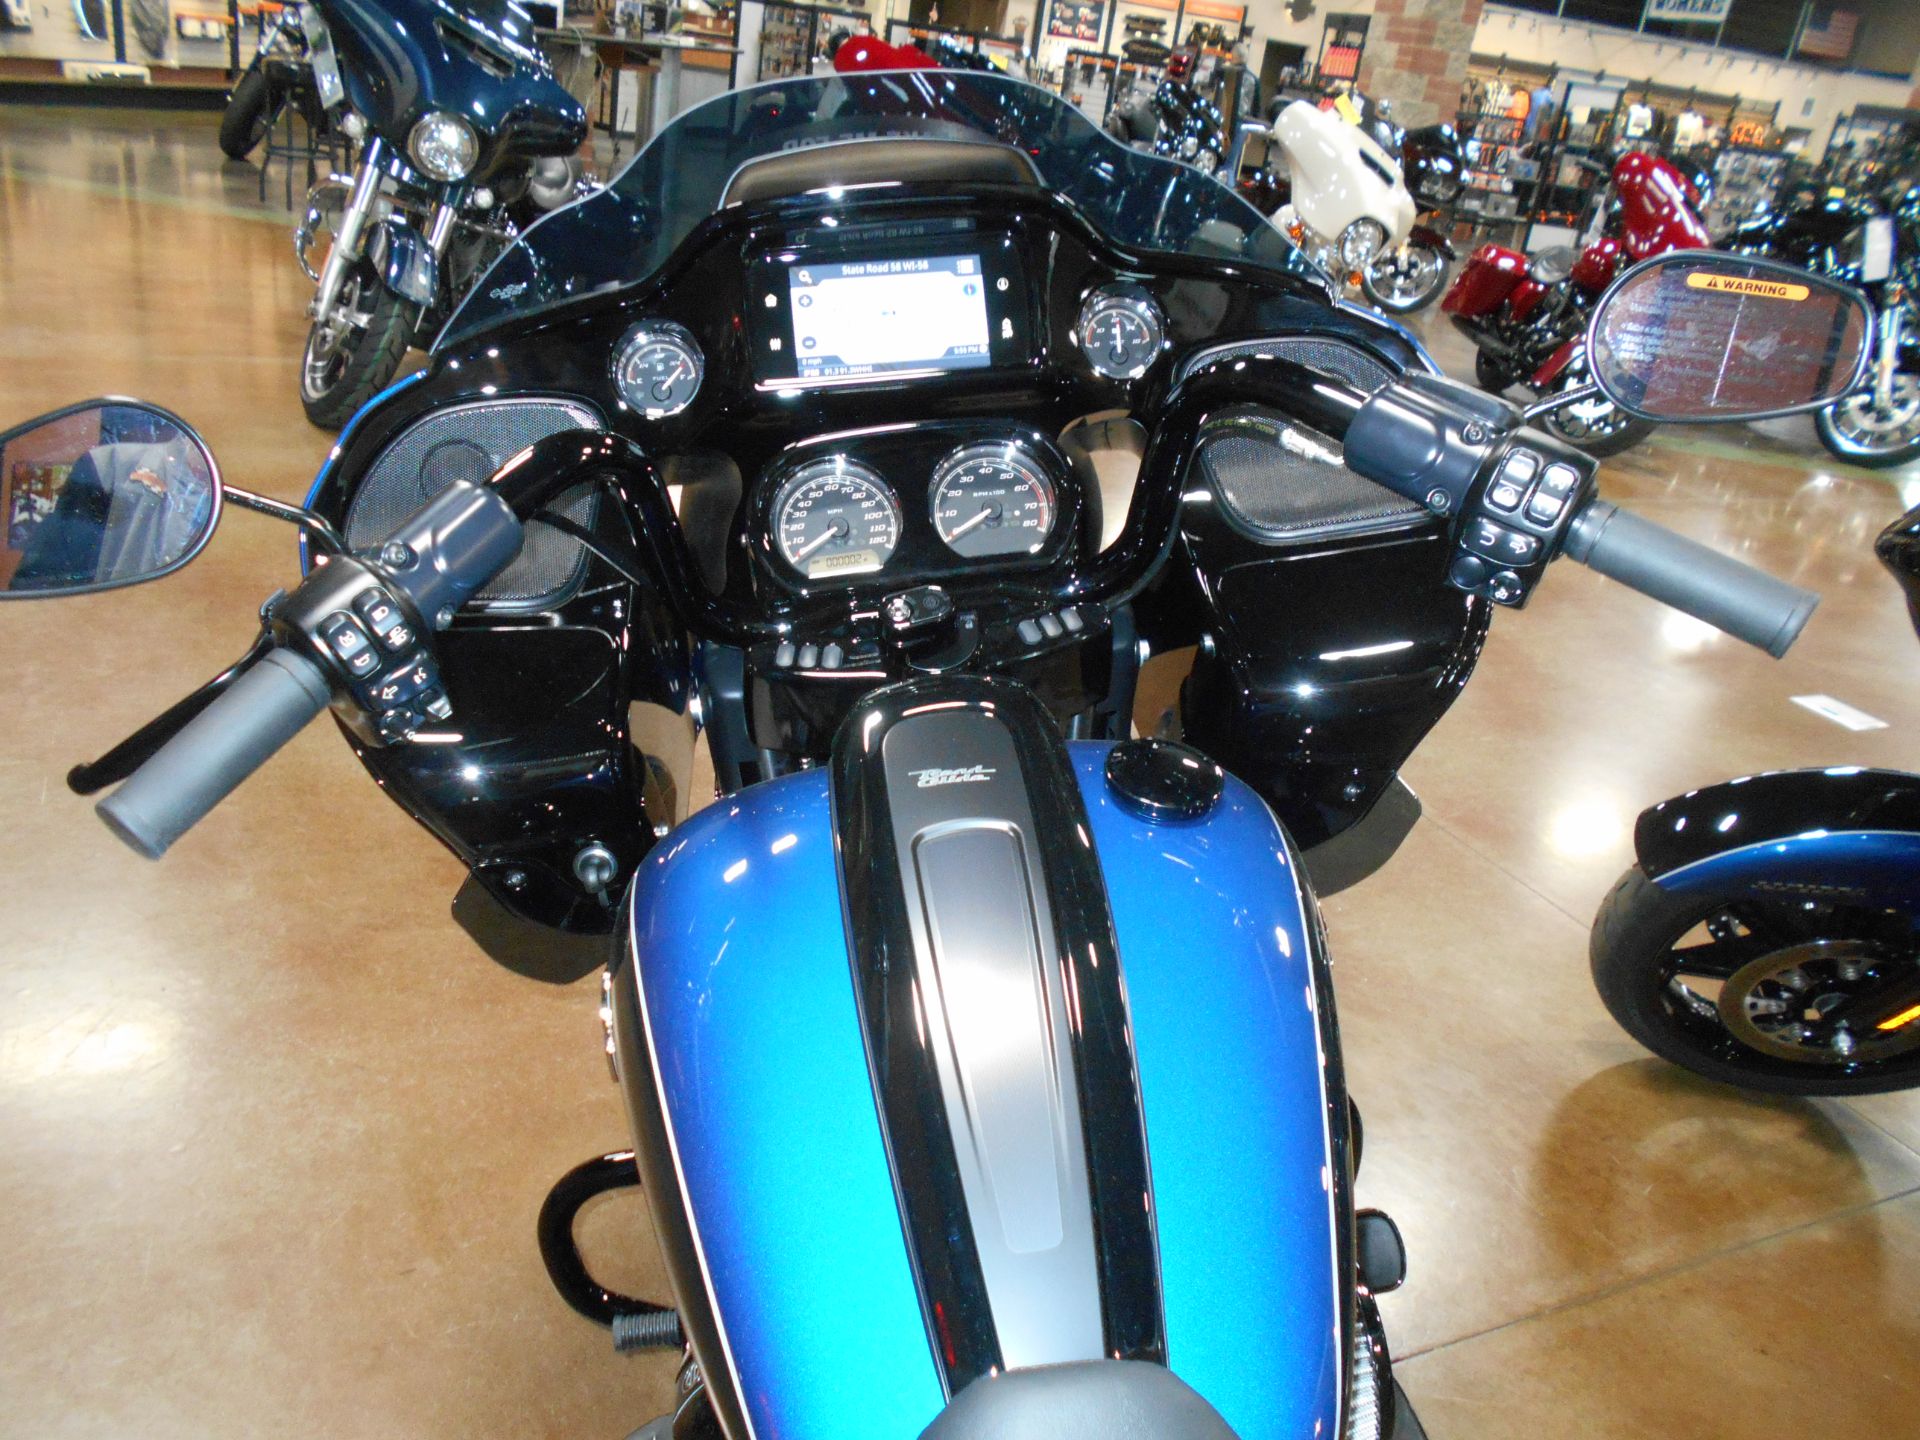 2022 Harley-Davidson Road Glide® Special in Mauston, Wisconsin - Photo 8